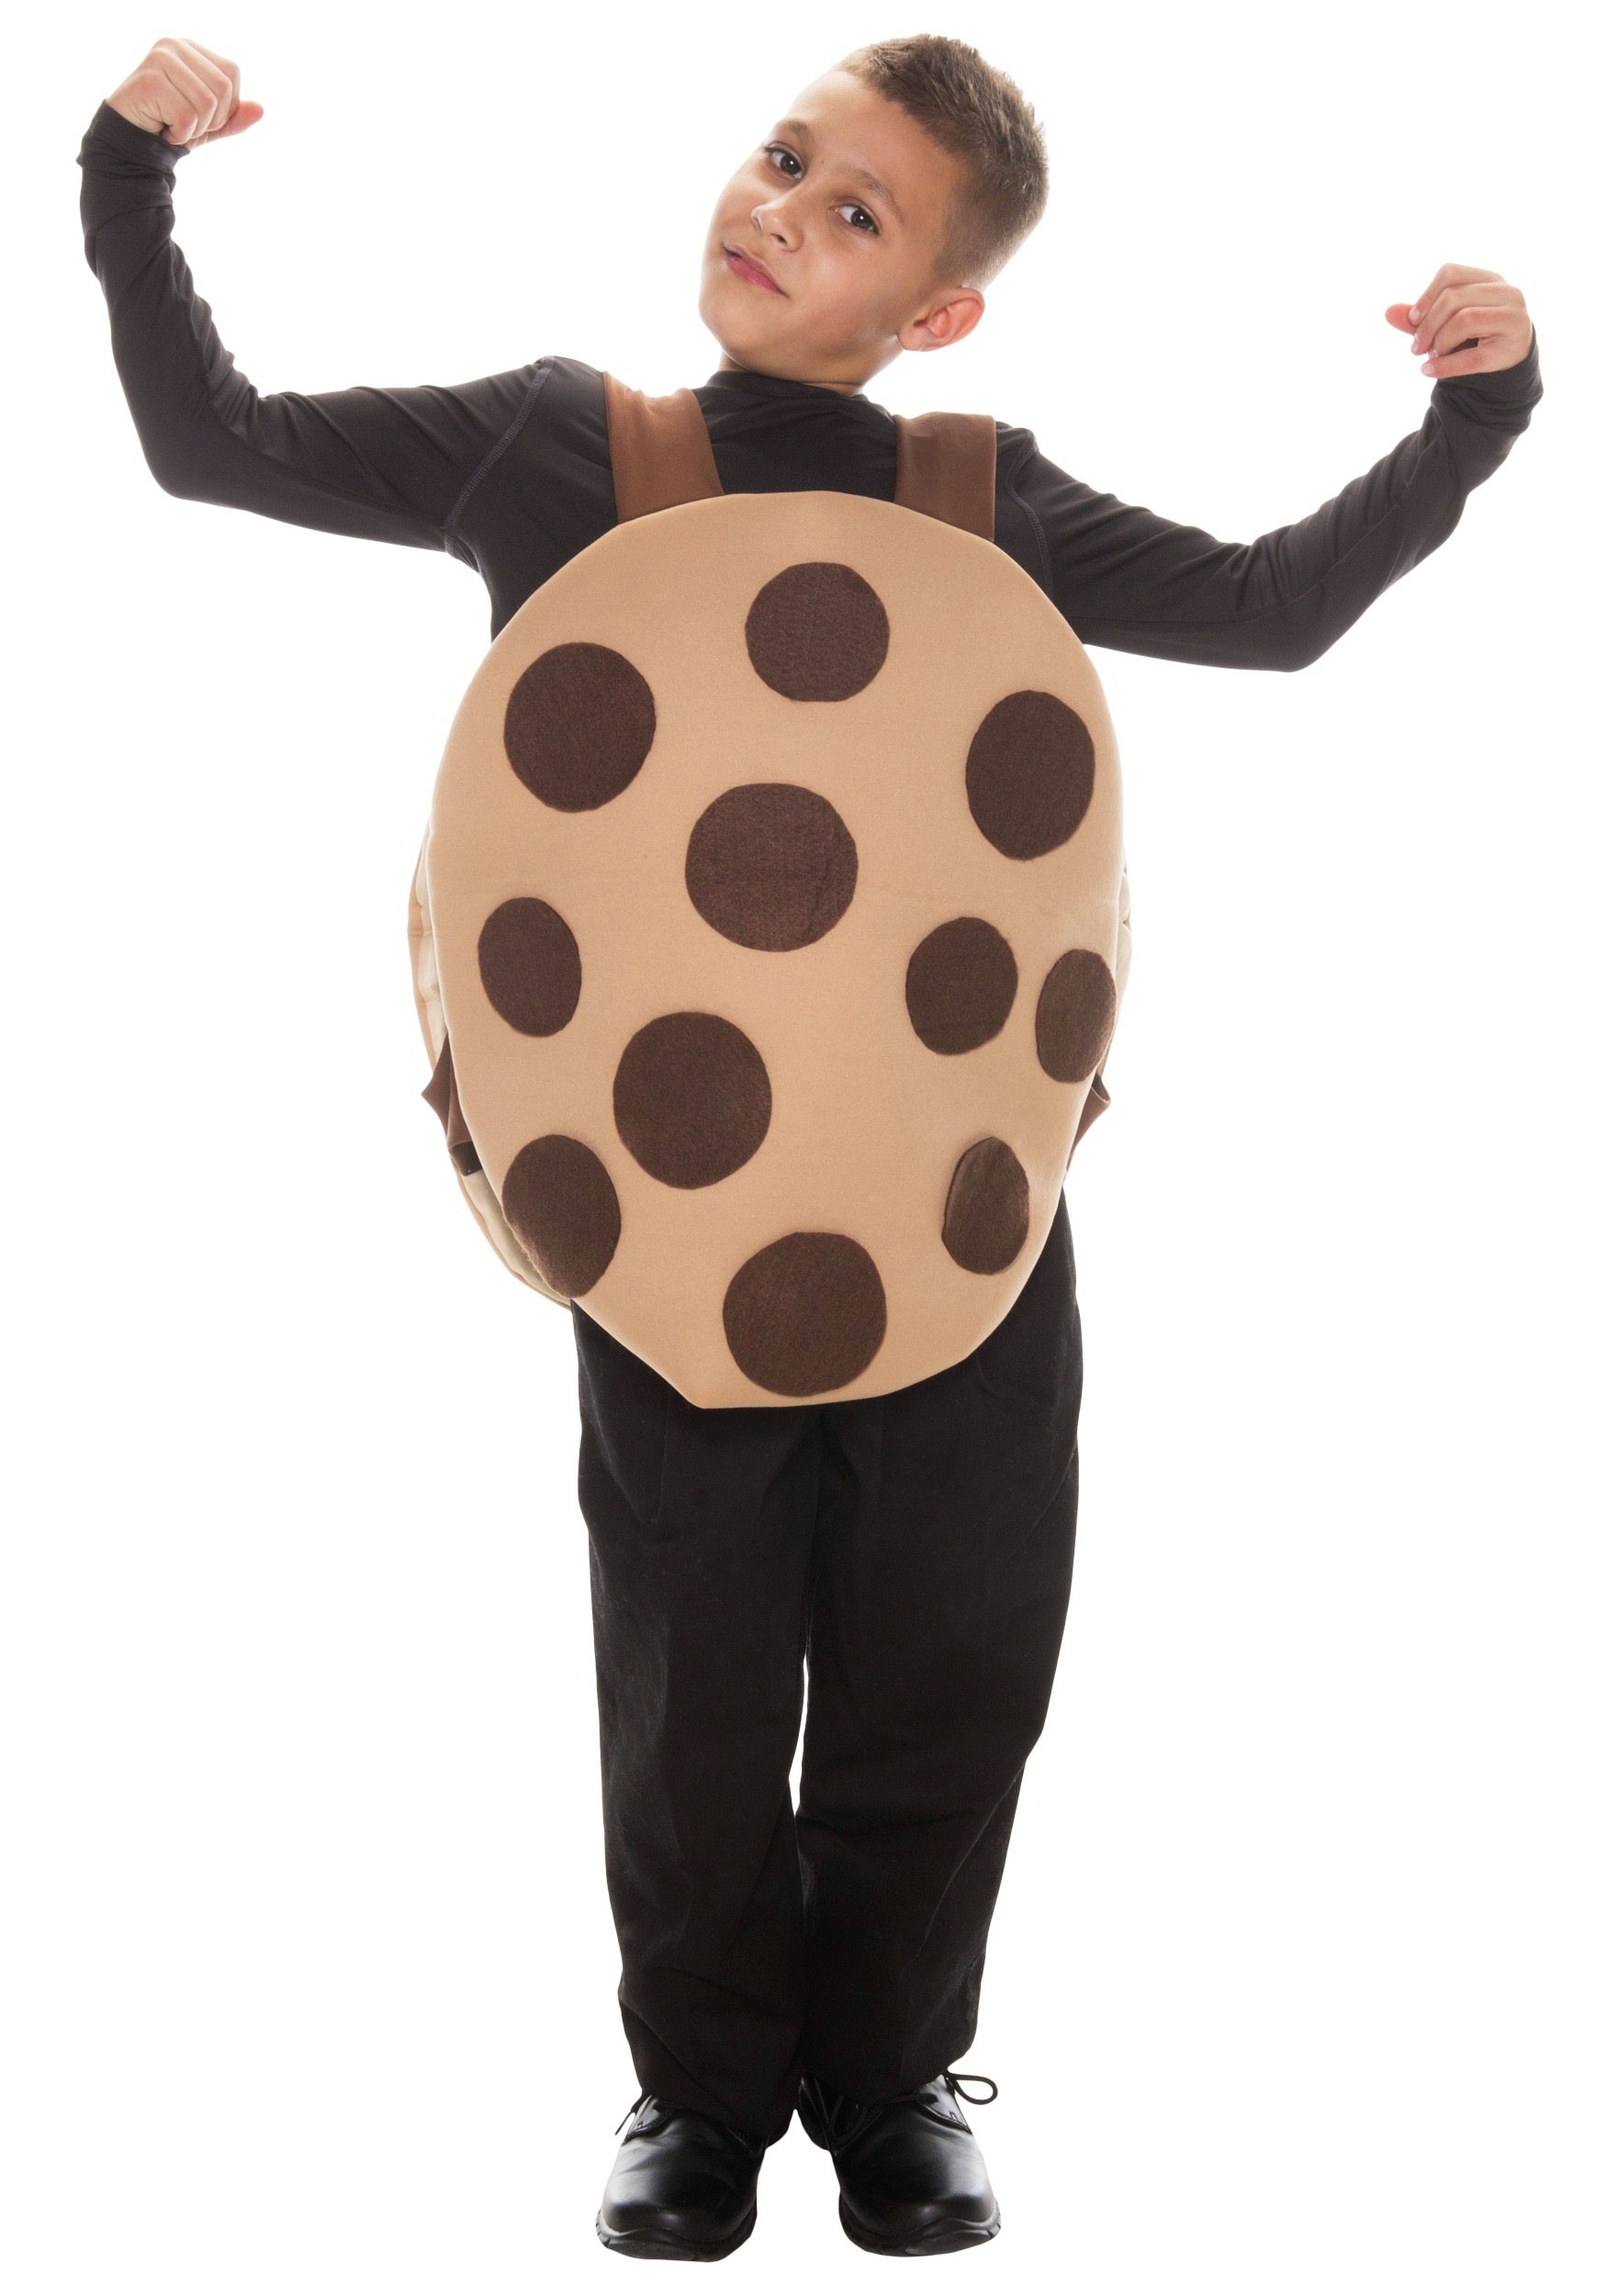 Photos - Fancy Dress Cookie FUN Costumes Chocolate Chip  Costume for Kids | Kid's Food Costumes 